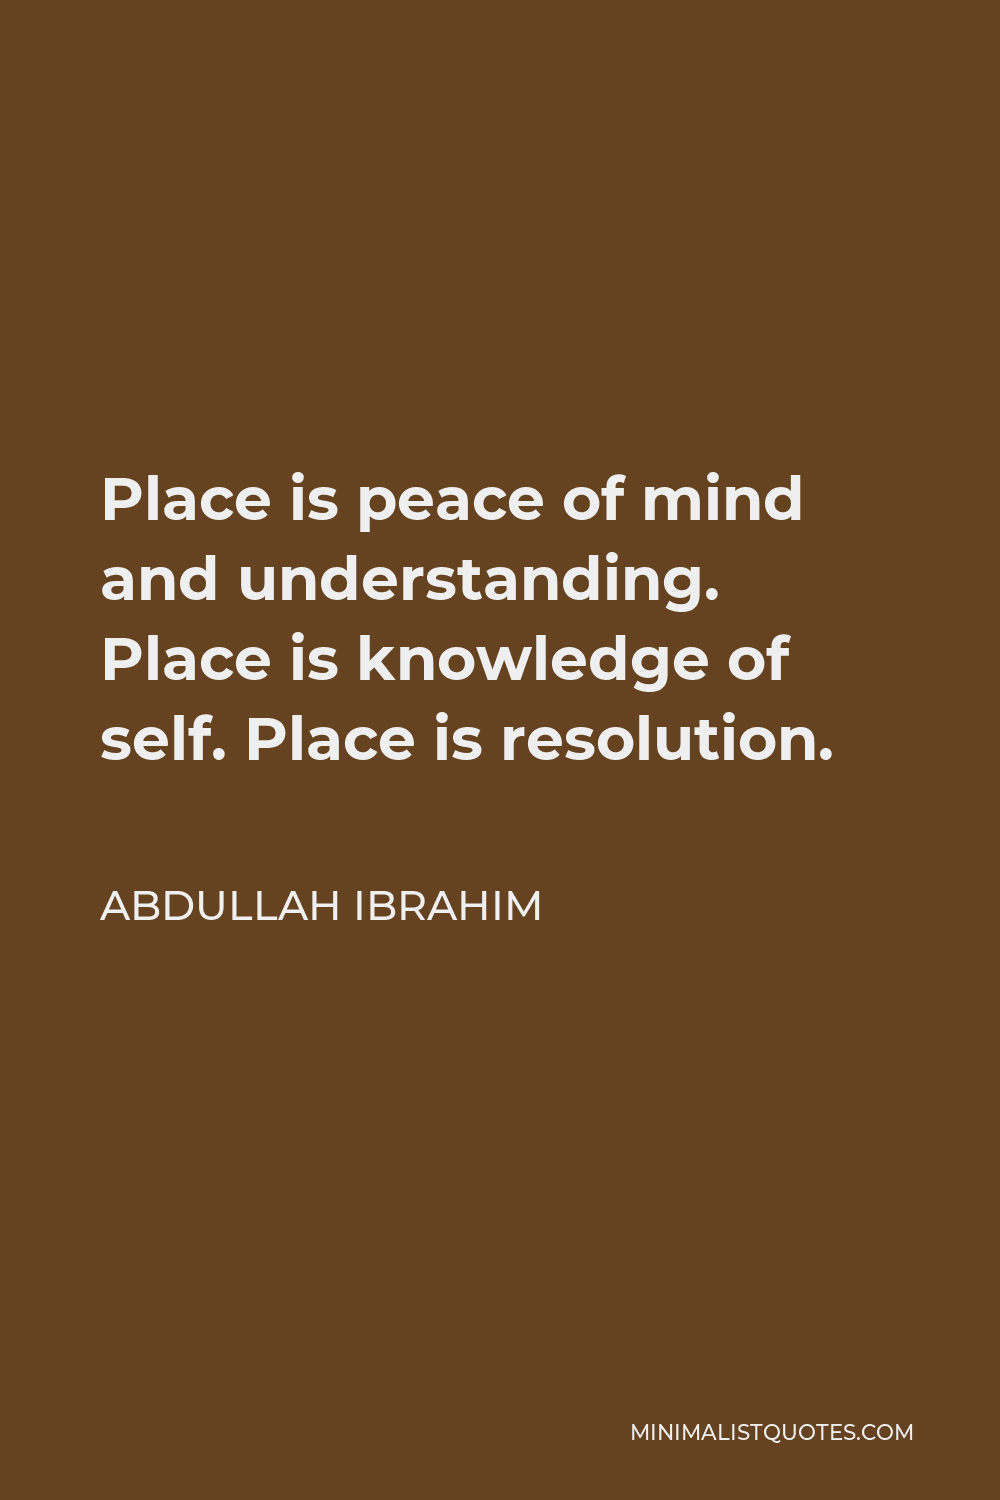 Abdullah Ibrahim Quote - Place is peace of mind and understanding. Place is knowledge of self. Place is resolution.